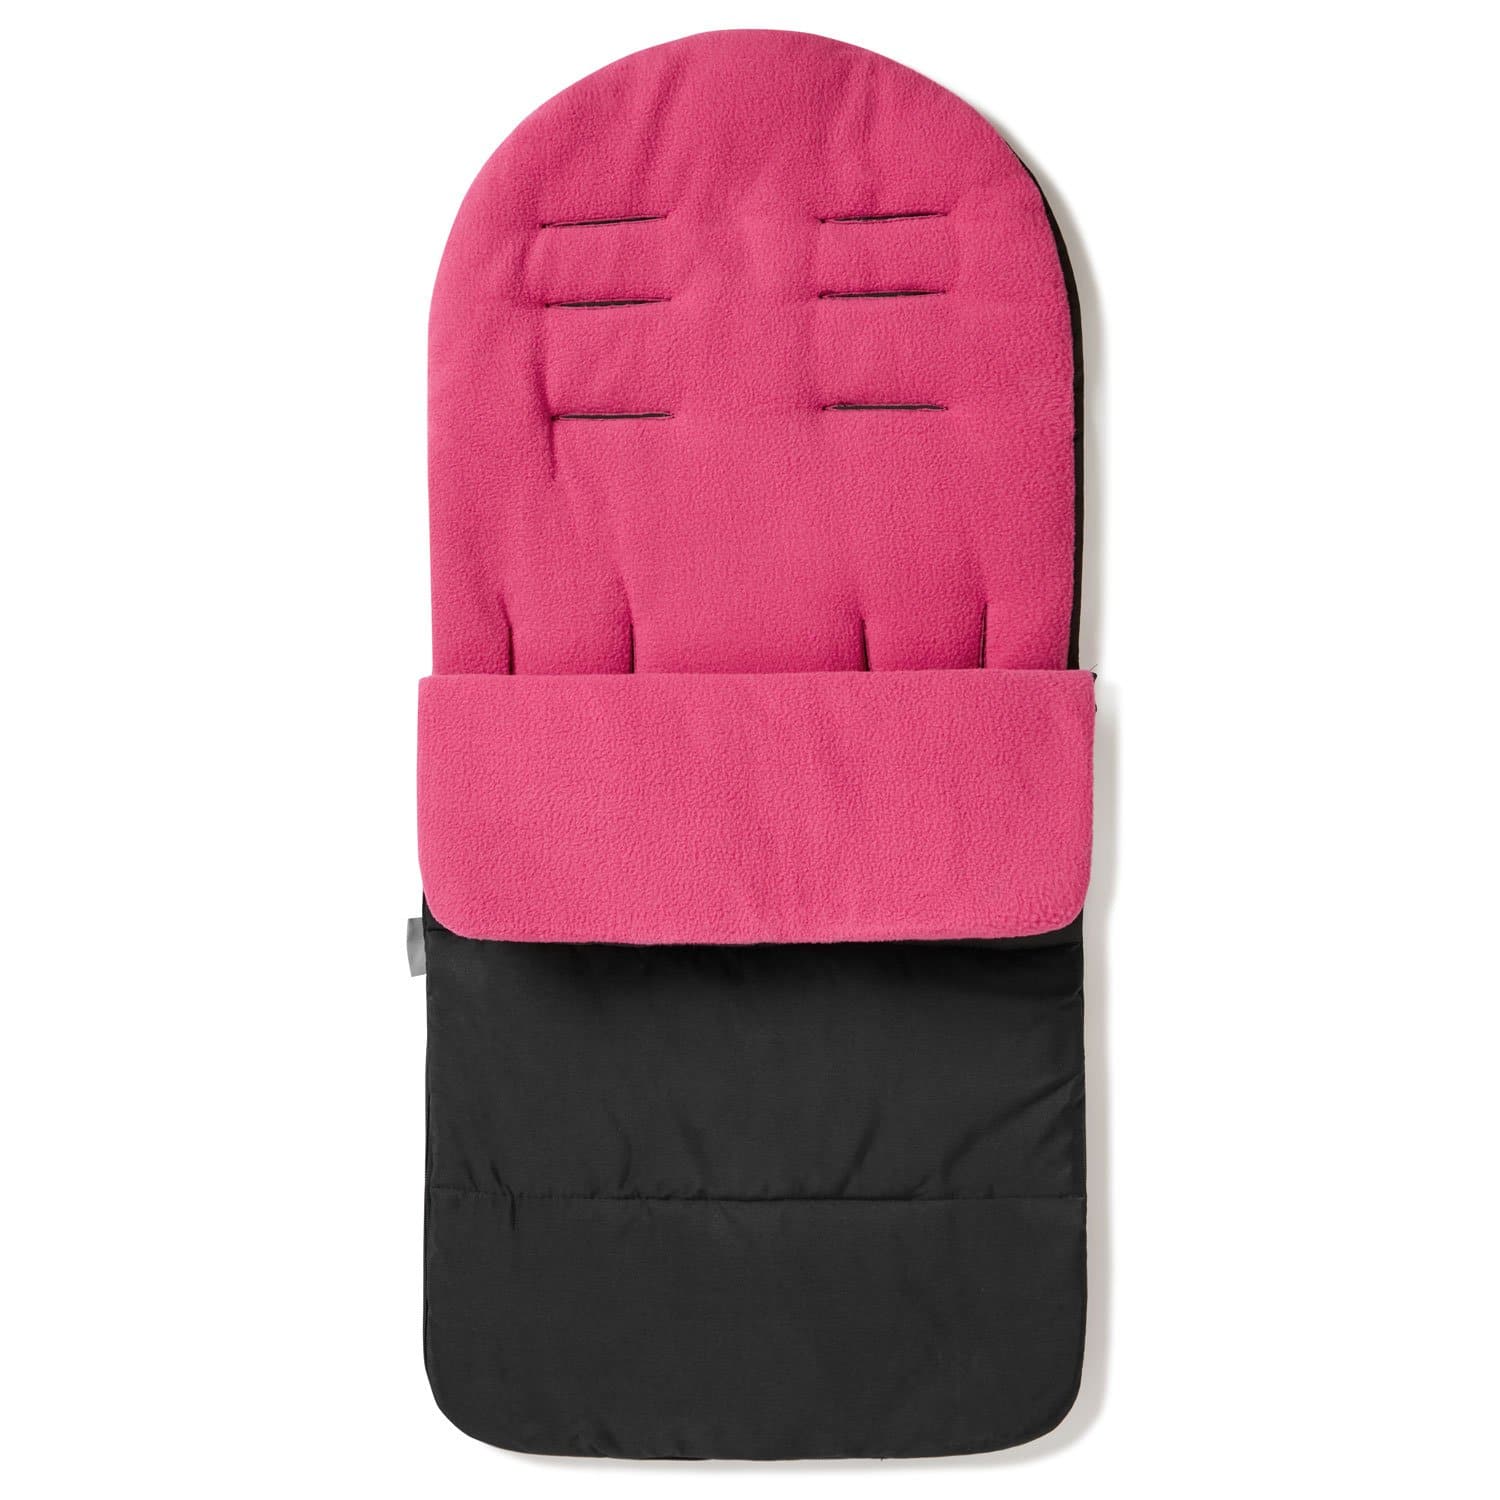 Premium Footmuff / Cosy Toes Compatible with Joolz - Pink Rose / Fits All Models | For Your Little One